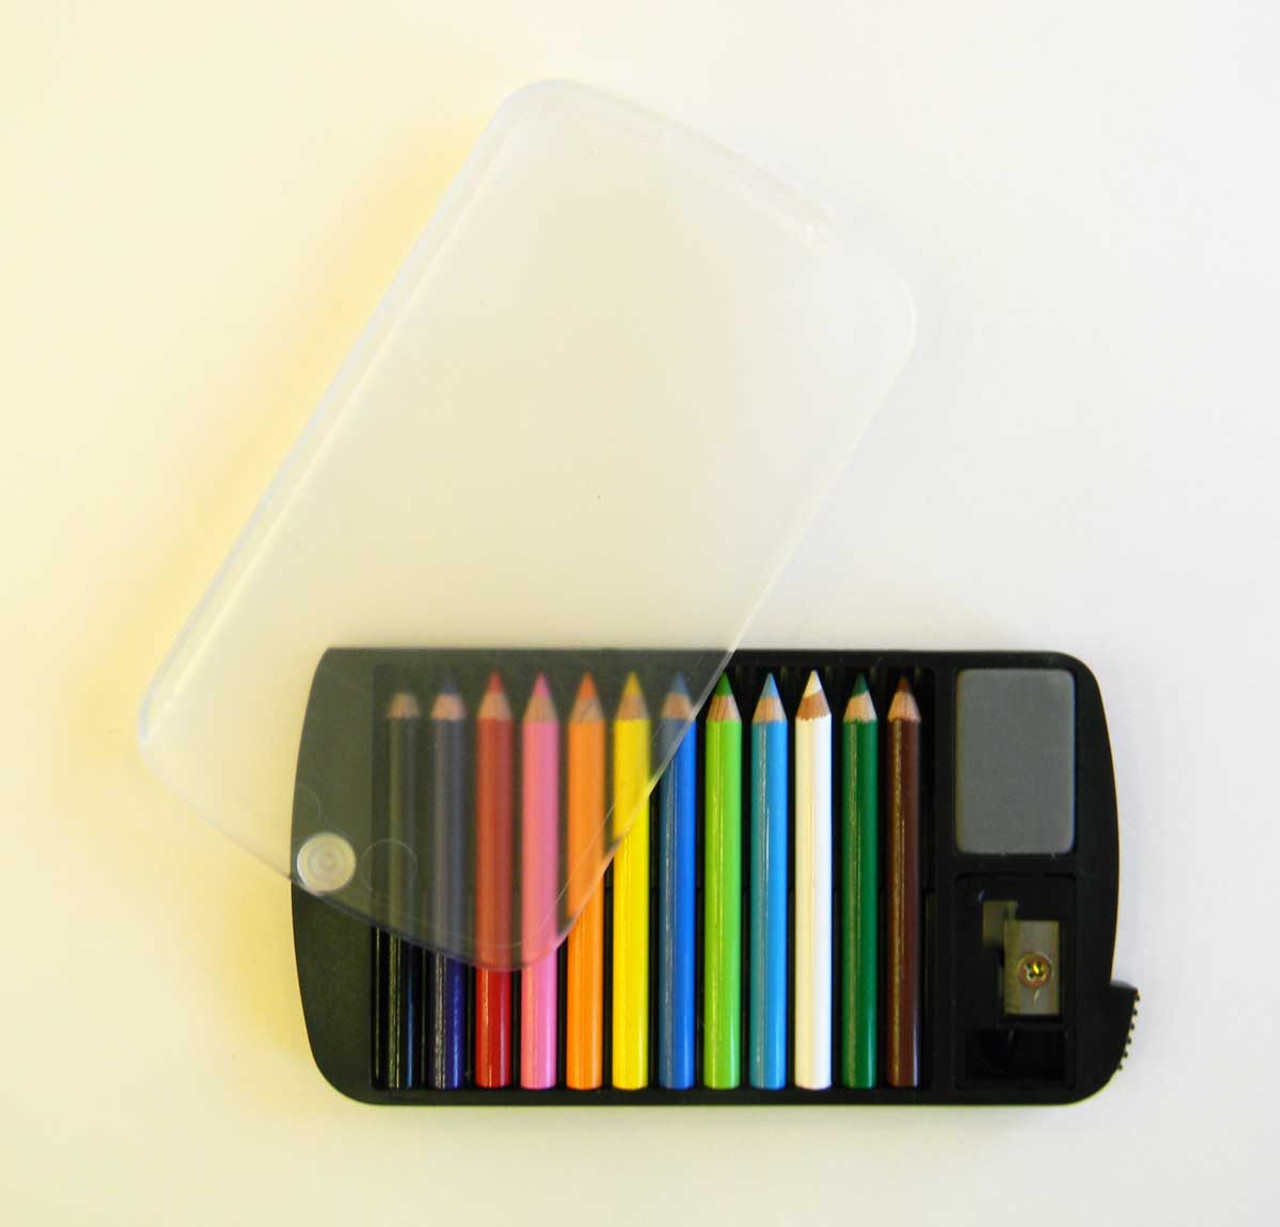 Mini Colored Pencil Set of 12 with Sharpener and Eraser in Plastic